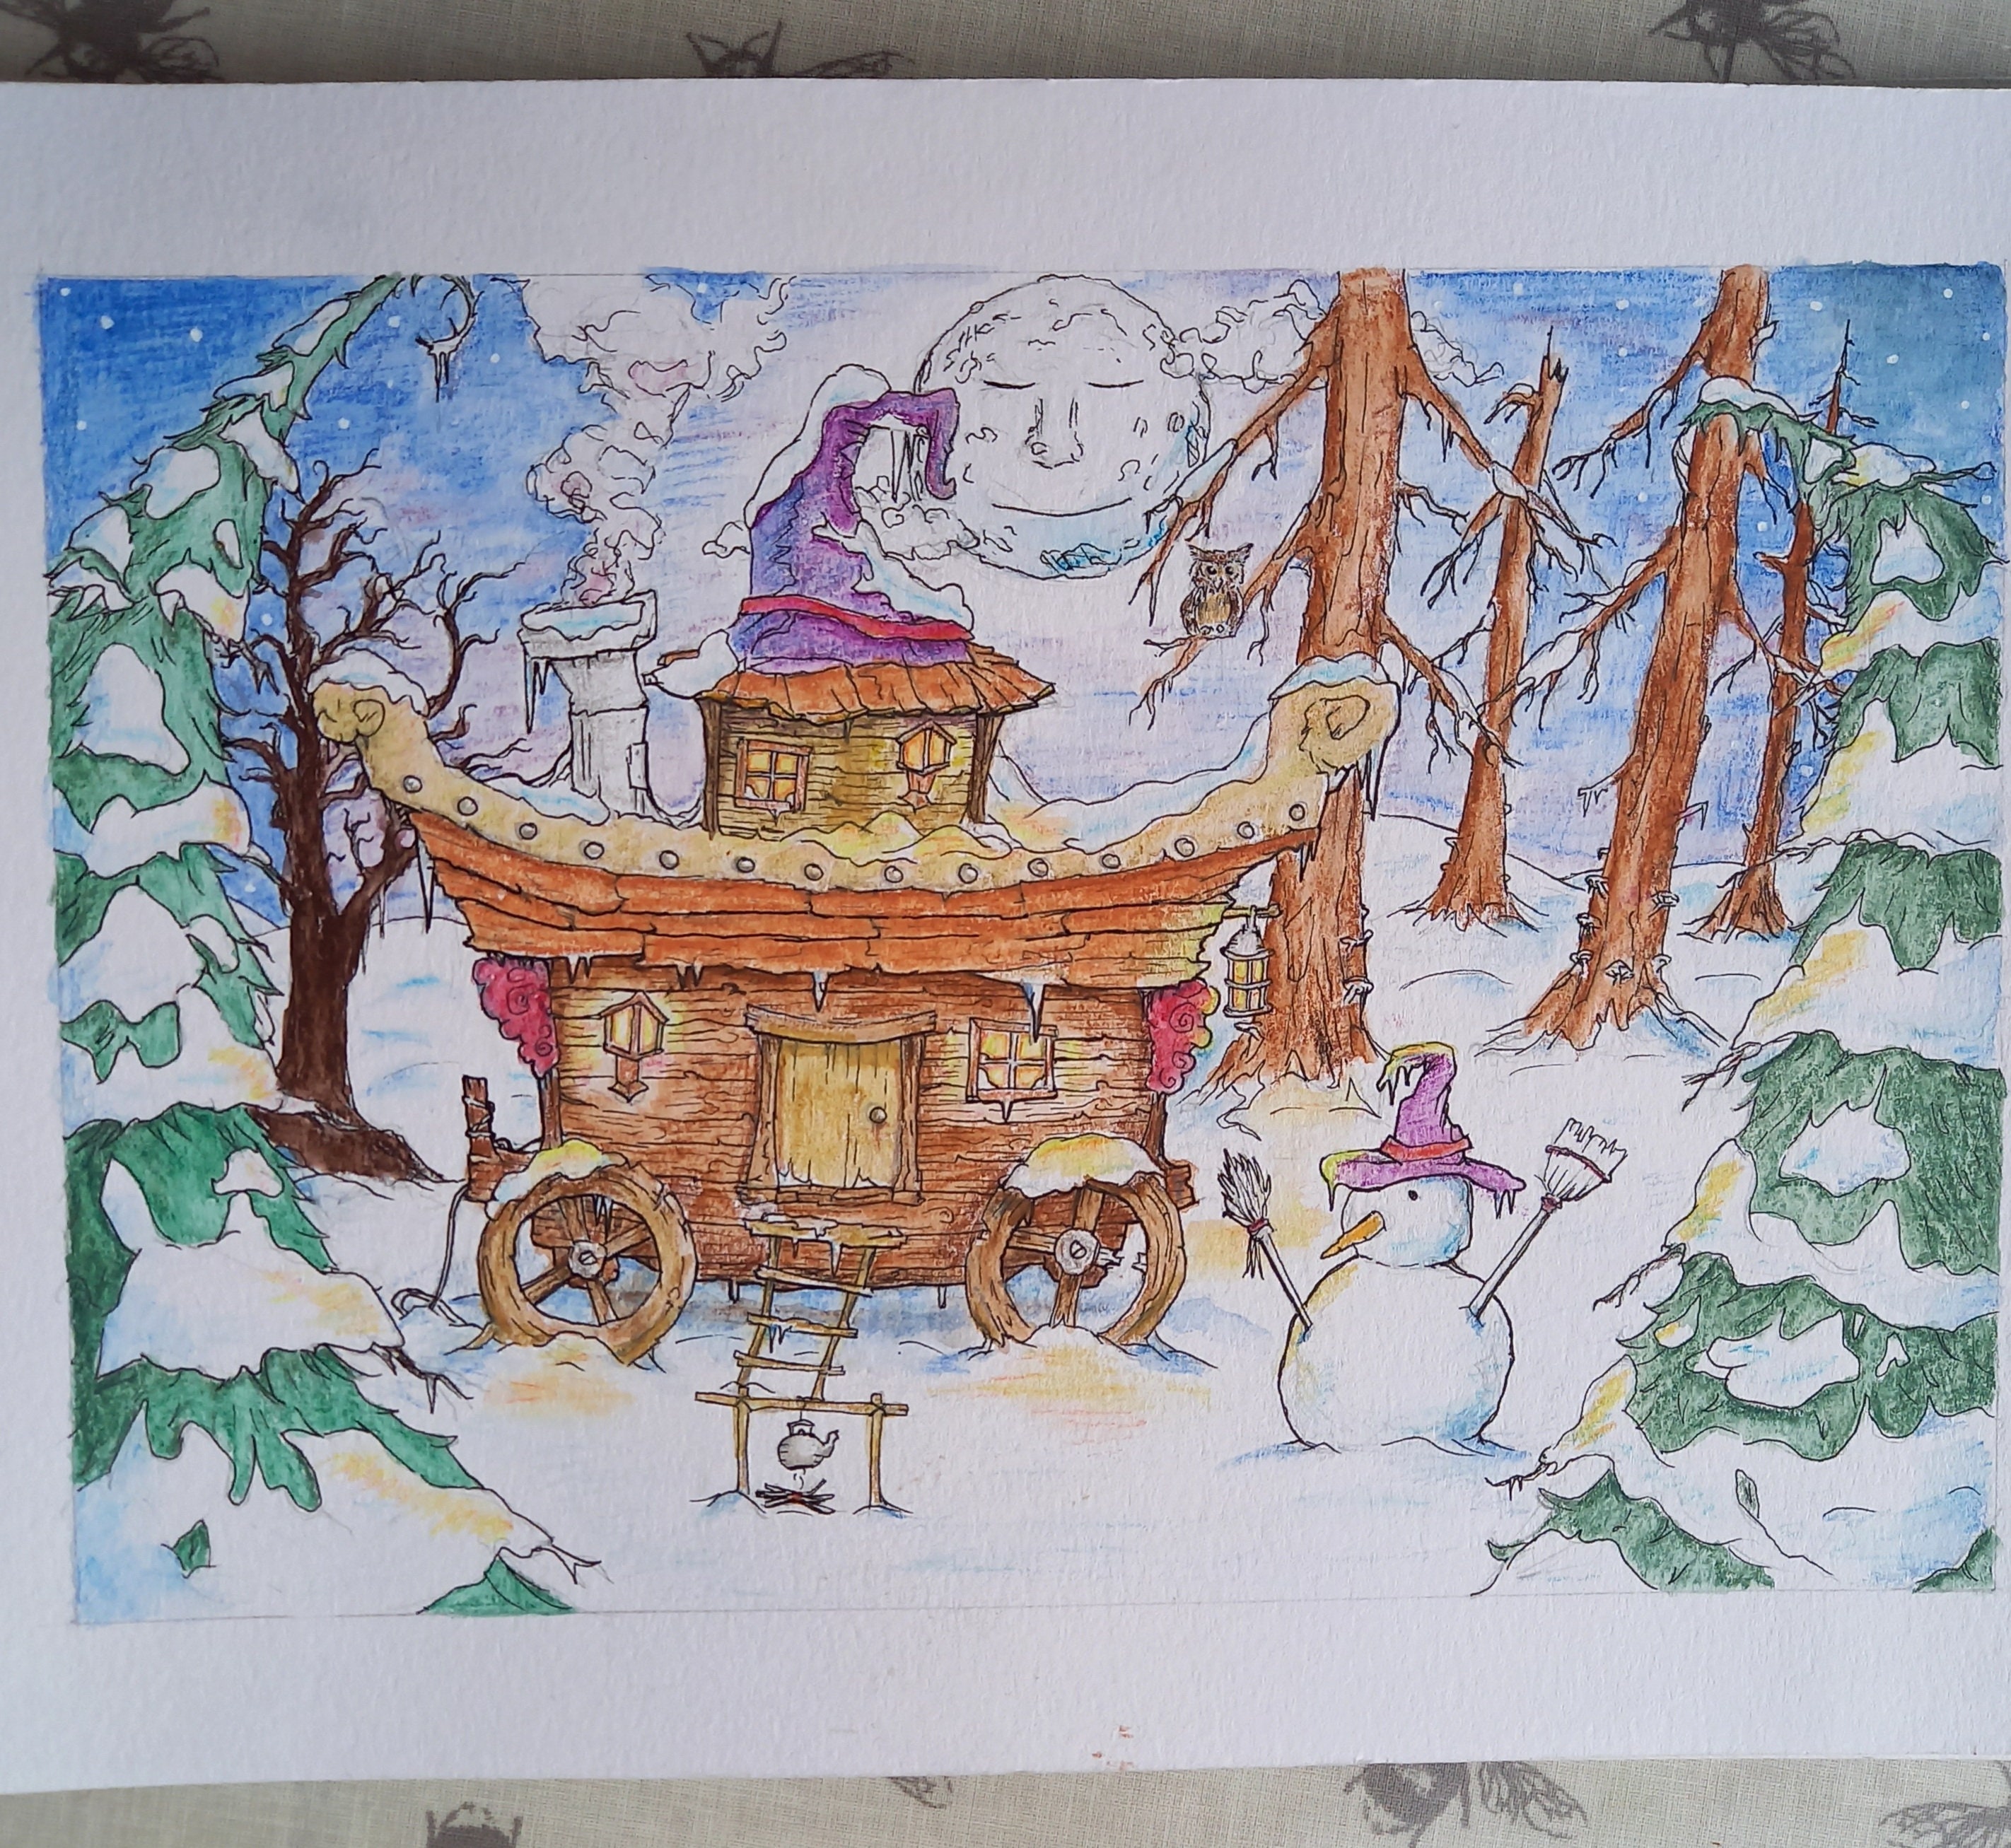 A typical elven caravan. This drawing is inspired by the amazing